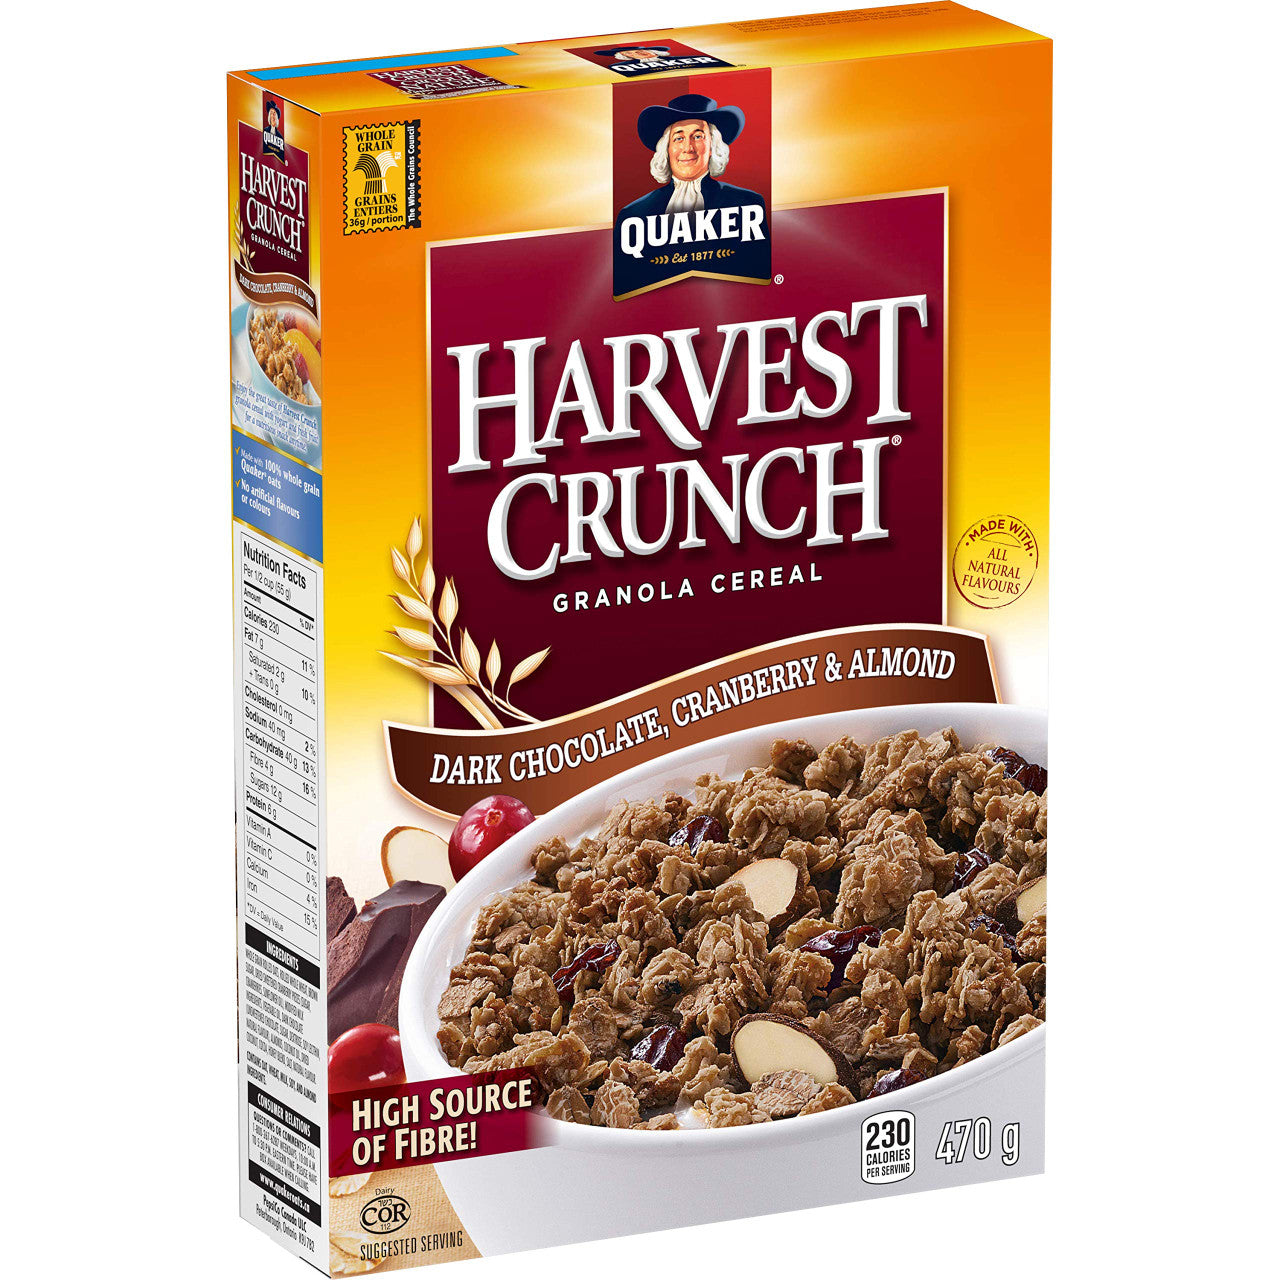 Quaker Harvest Crunch, Dark Chocolate, Cranberry & Almond Cereal 550g/19.4oz. (Imported from Canada)